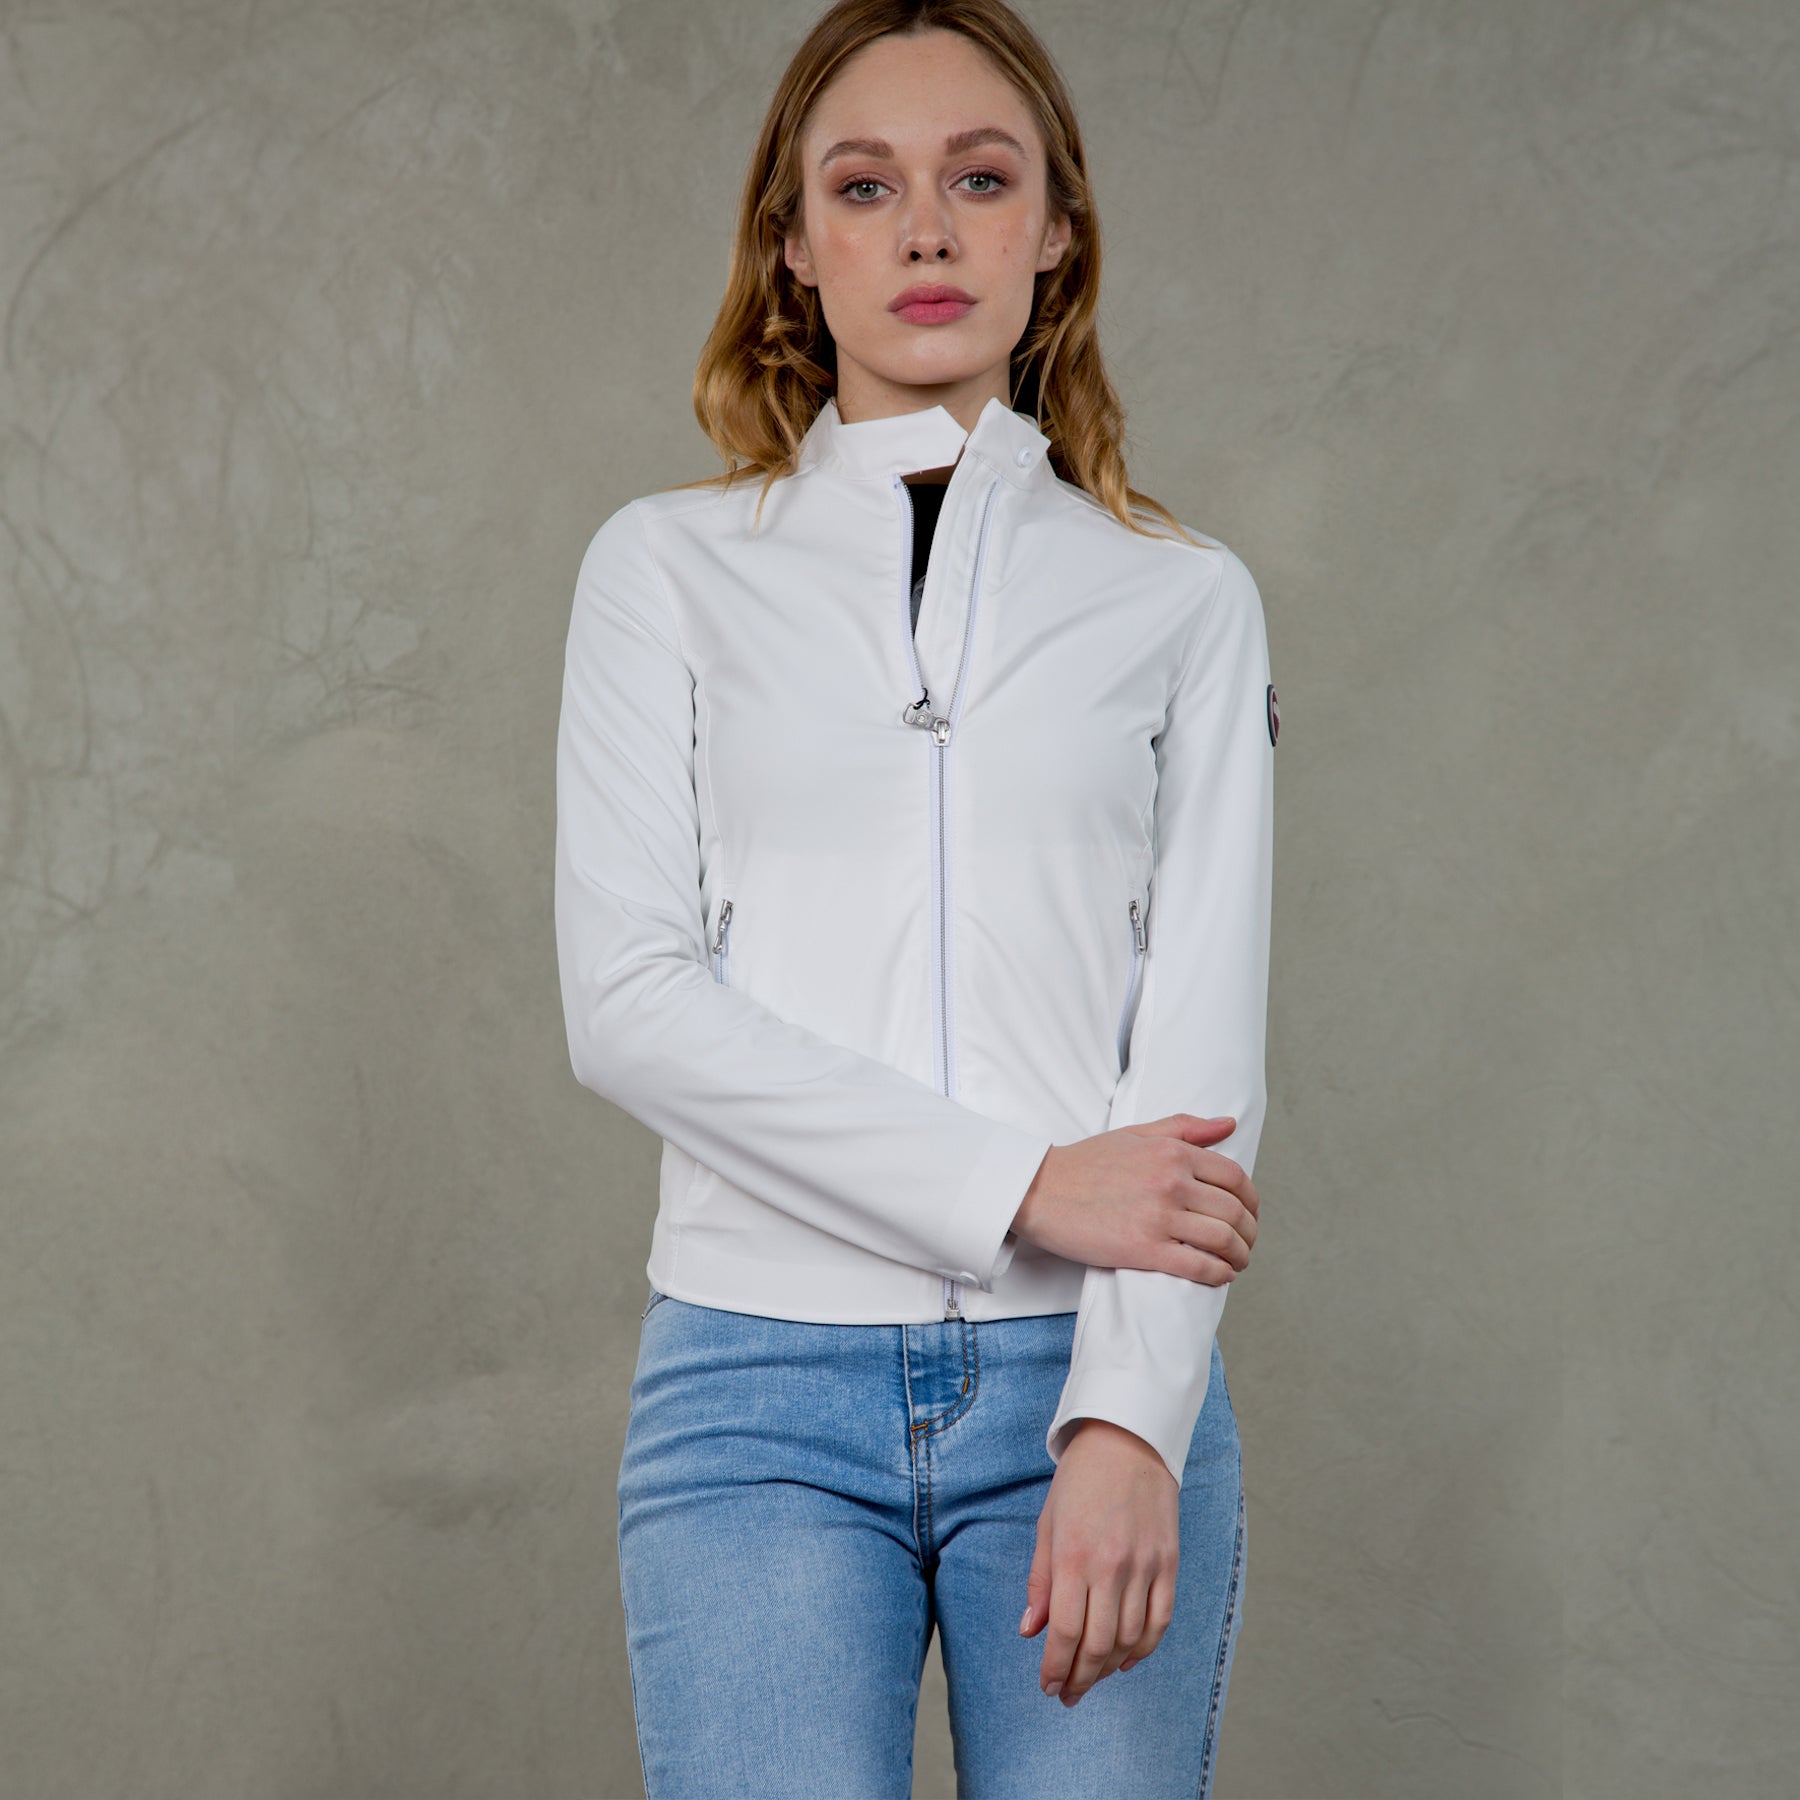 Softshell windproof jacket for women 1902r6wv white bianco woman  - 5